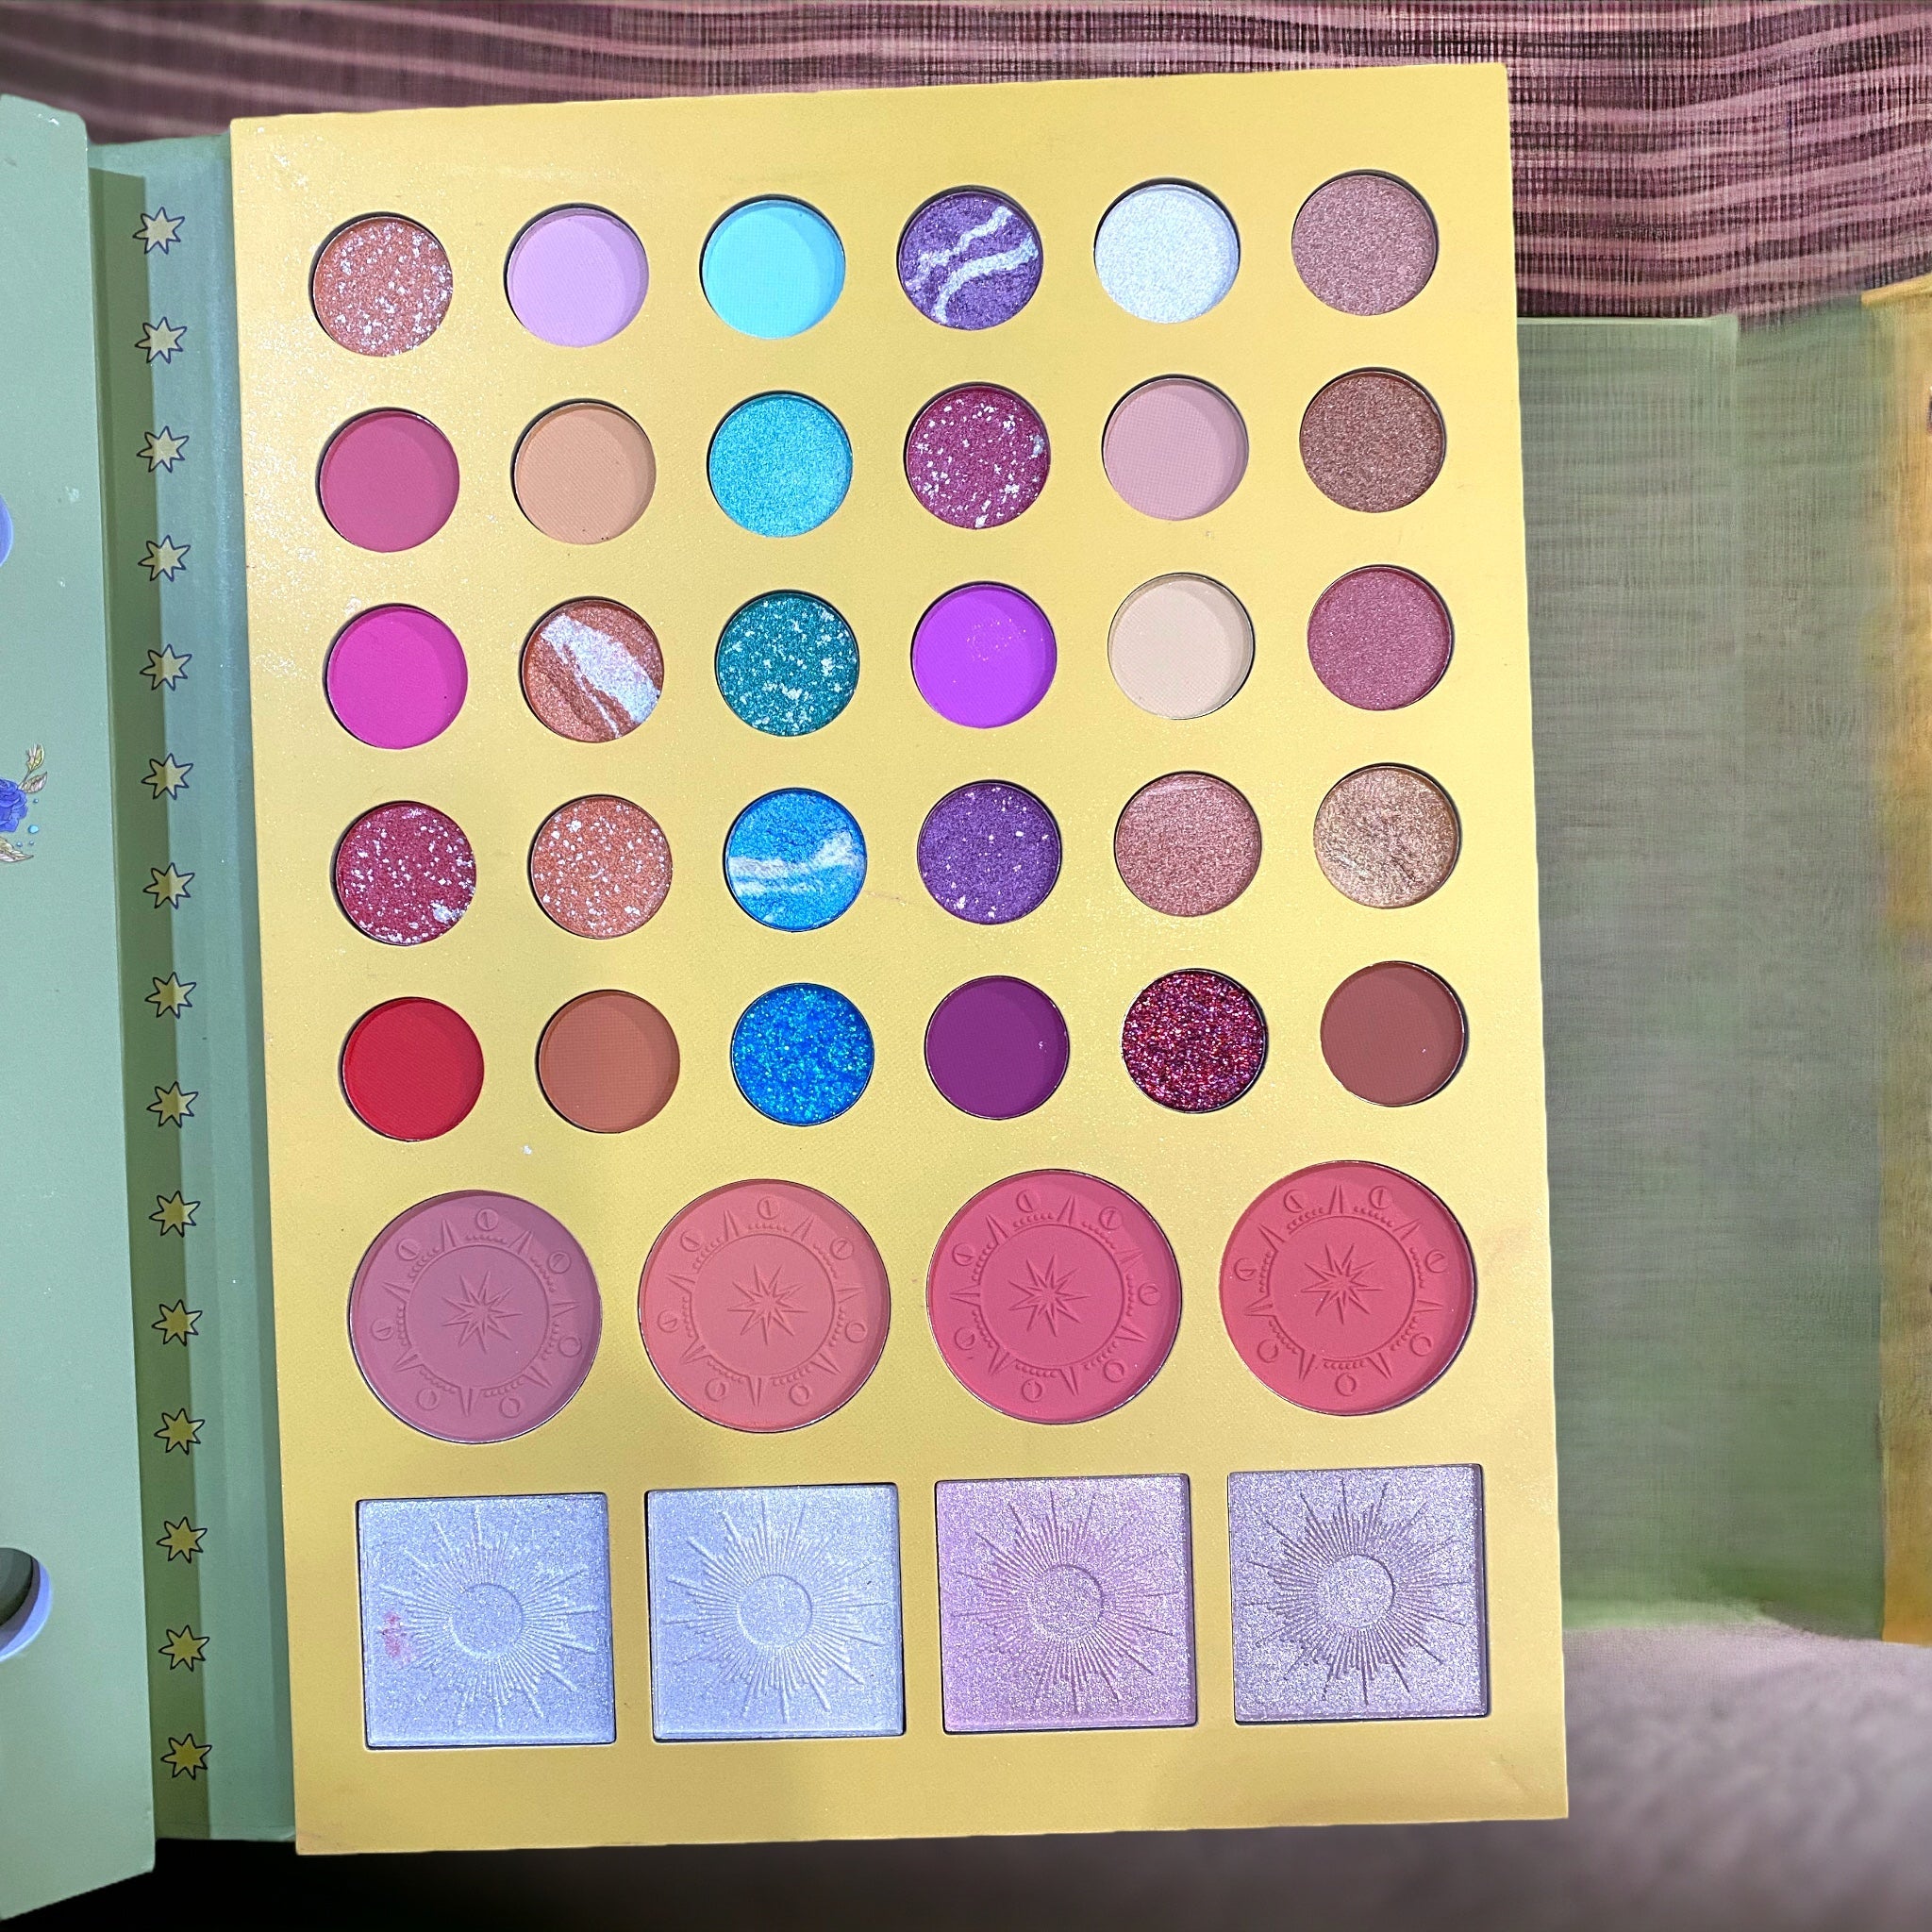 MOCALLURE ULTIMATE SHADOW BOOK PALETTE